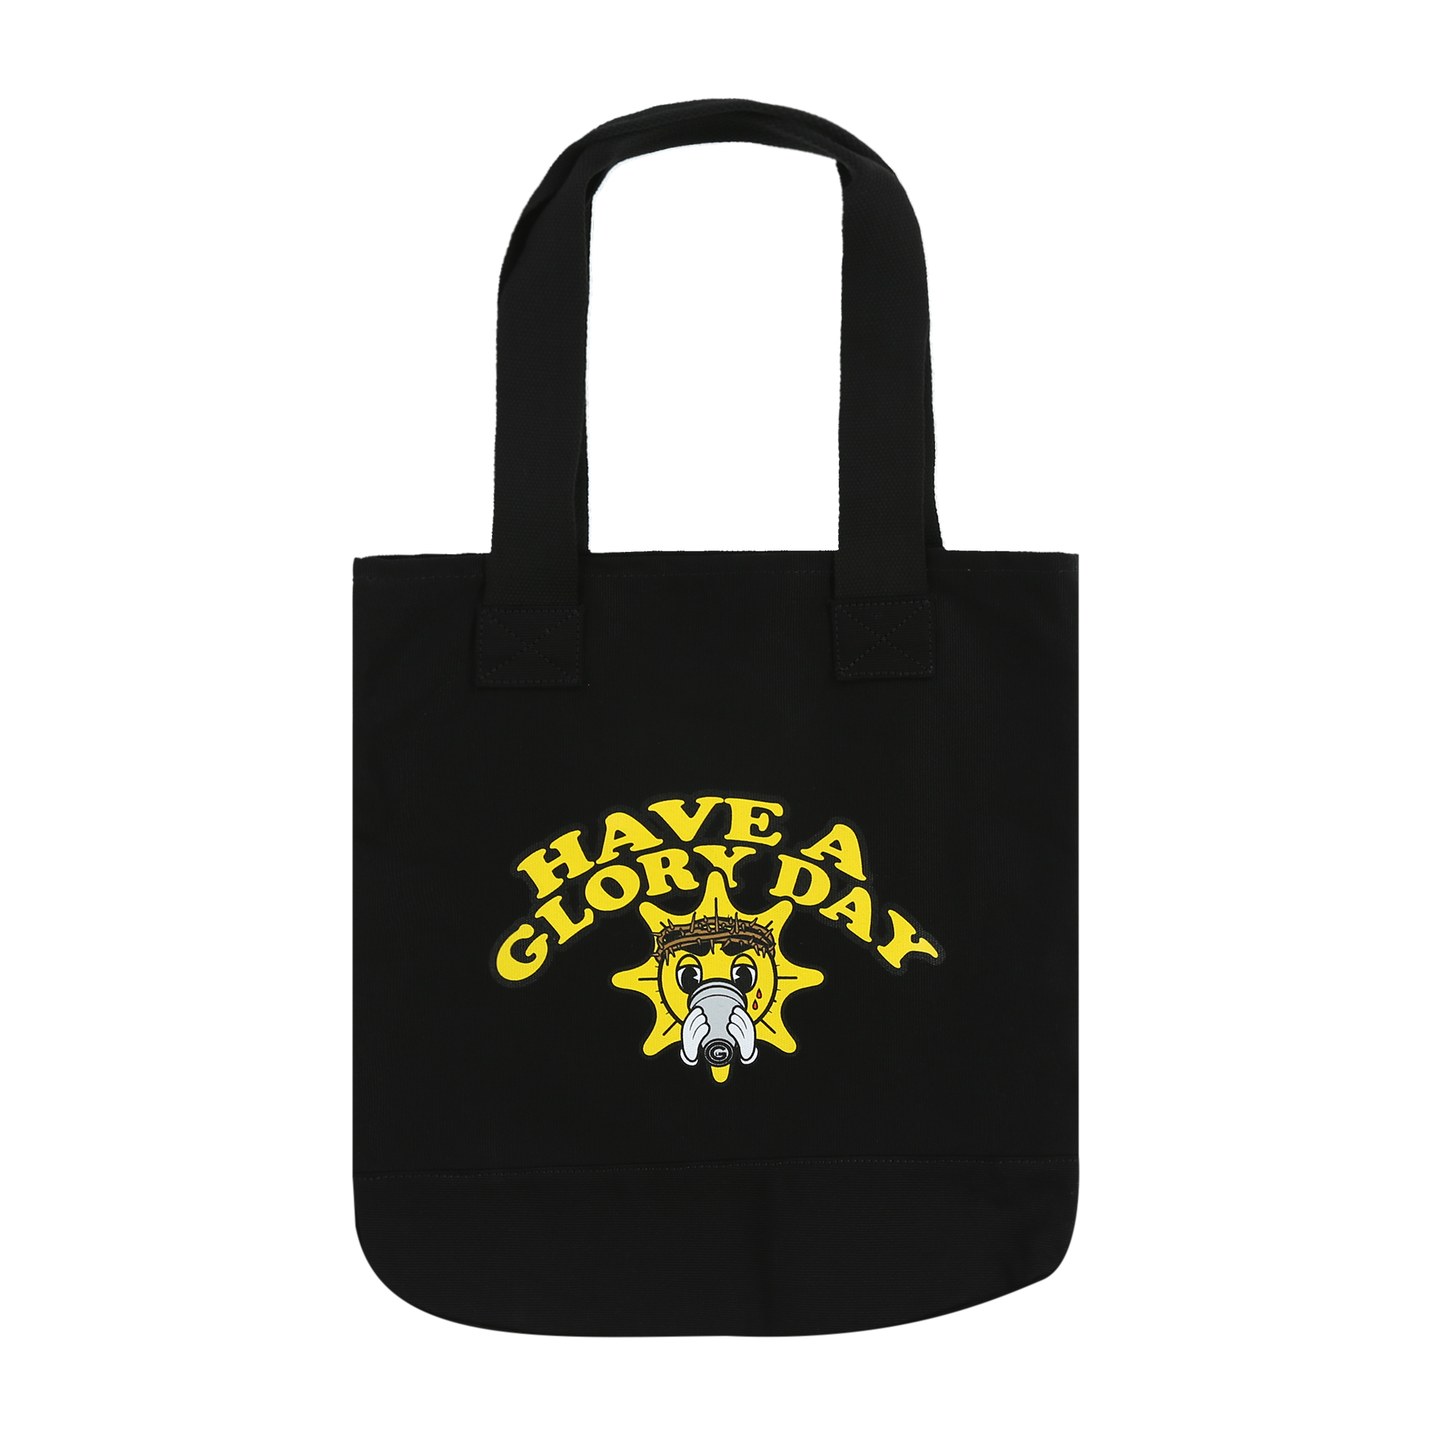 Have a Glory Day Tote Bag (Black)